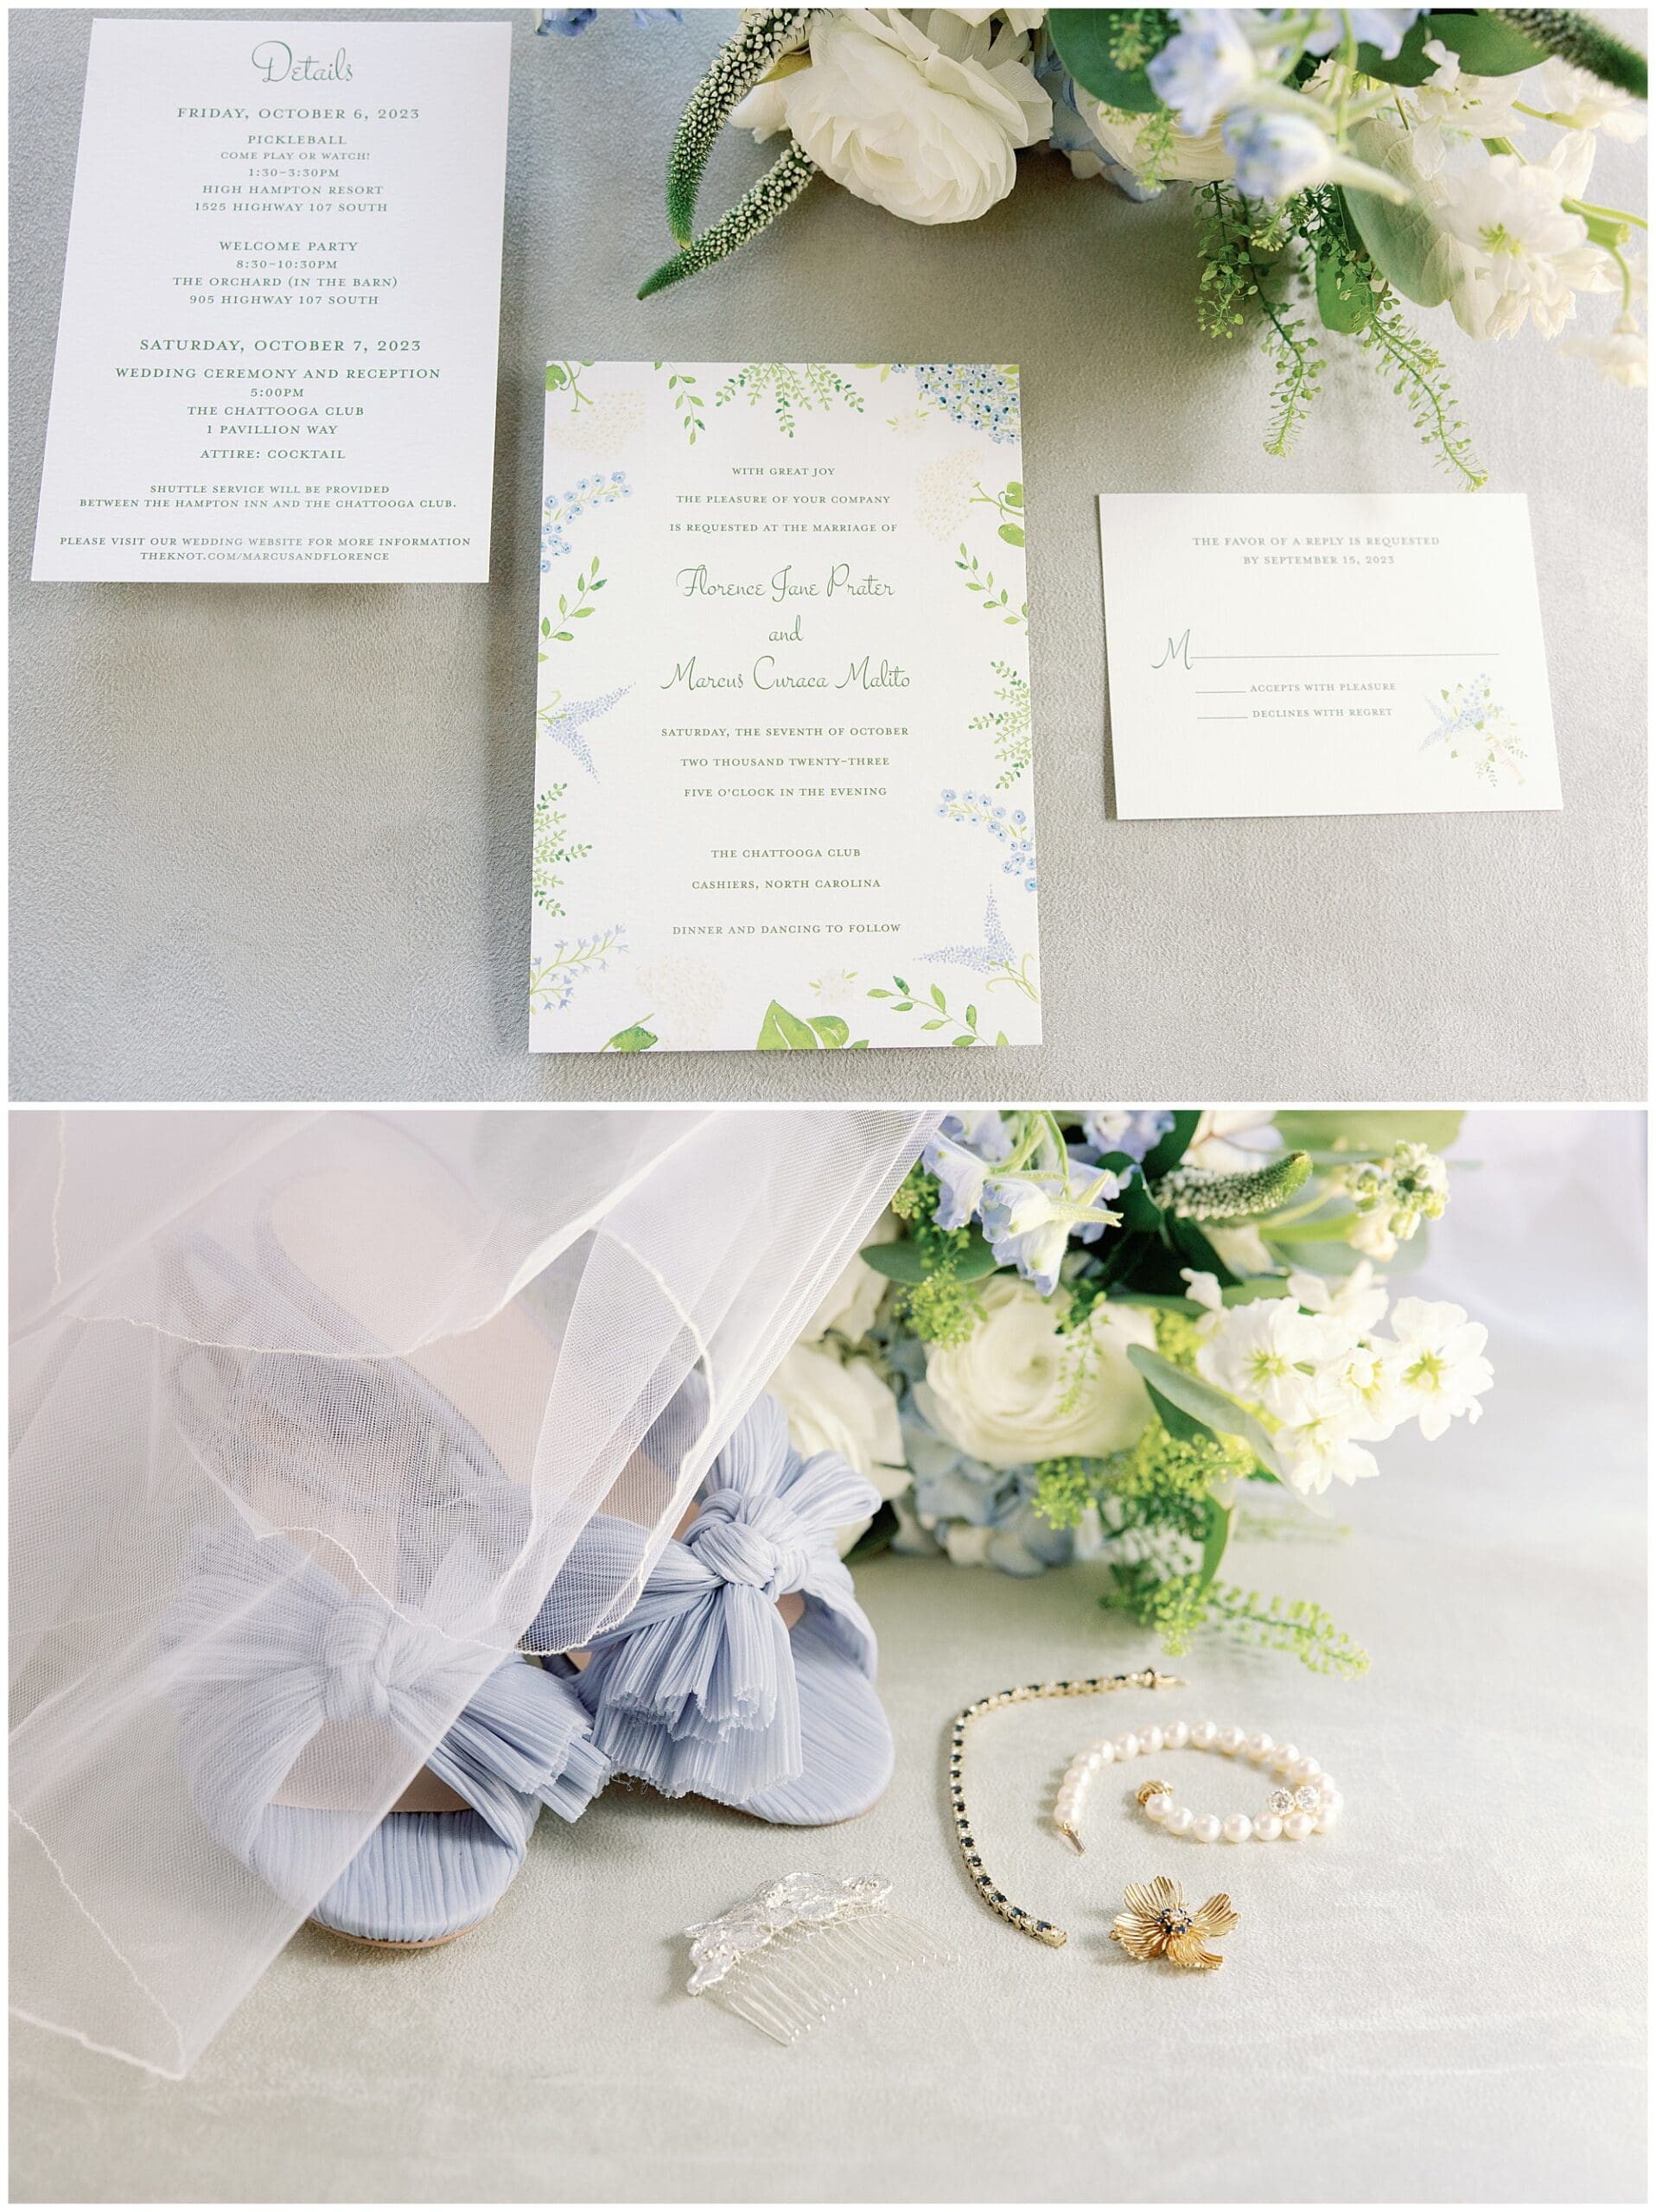 A wedding invitation with blue shoes, flowers and a veil.